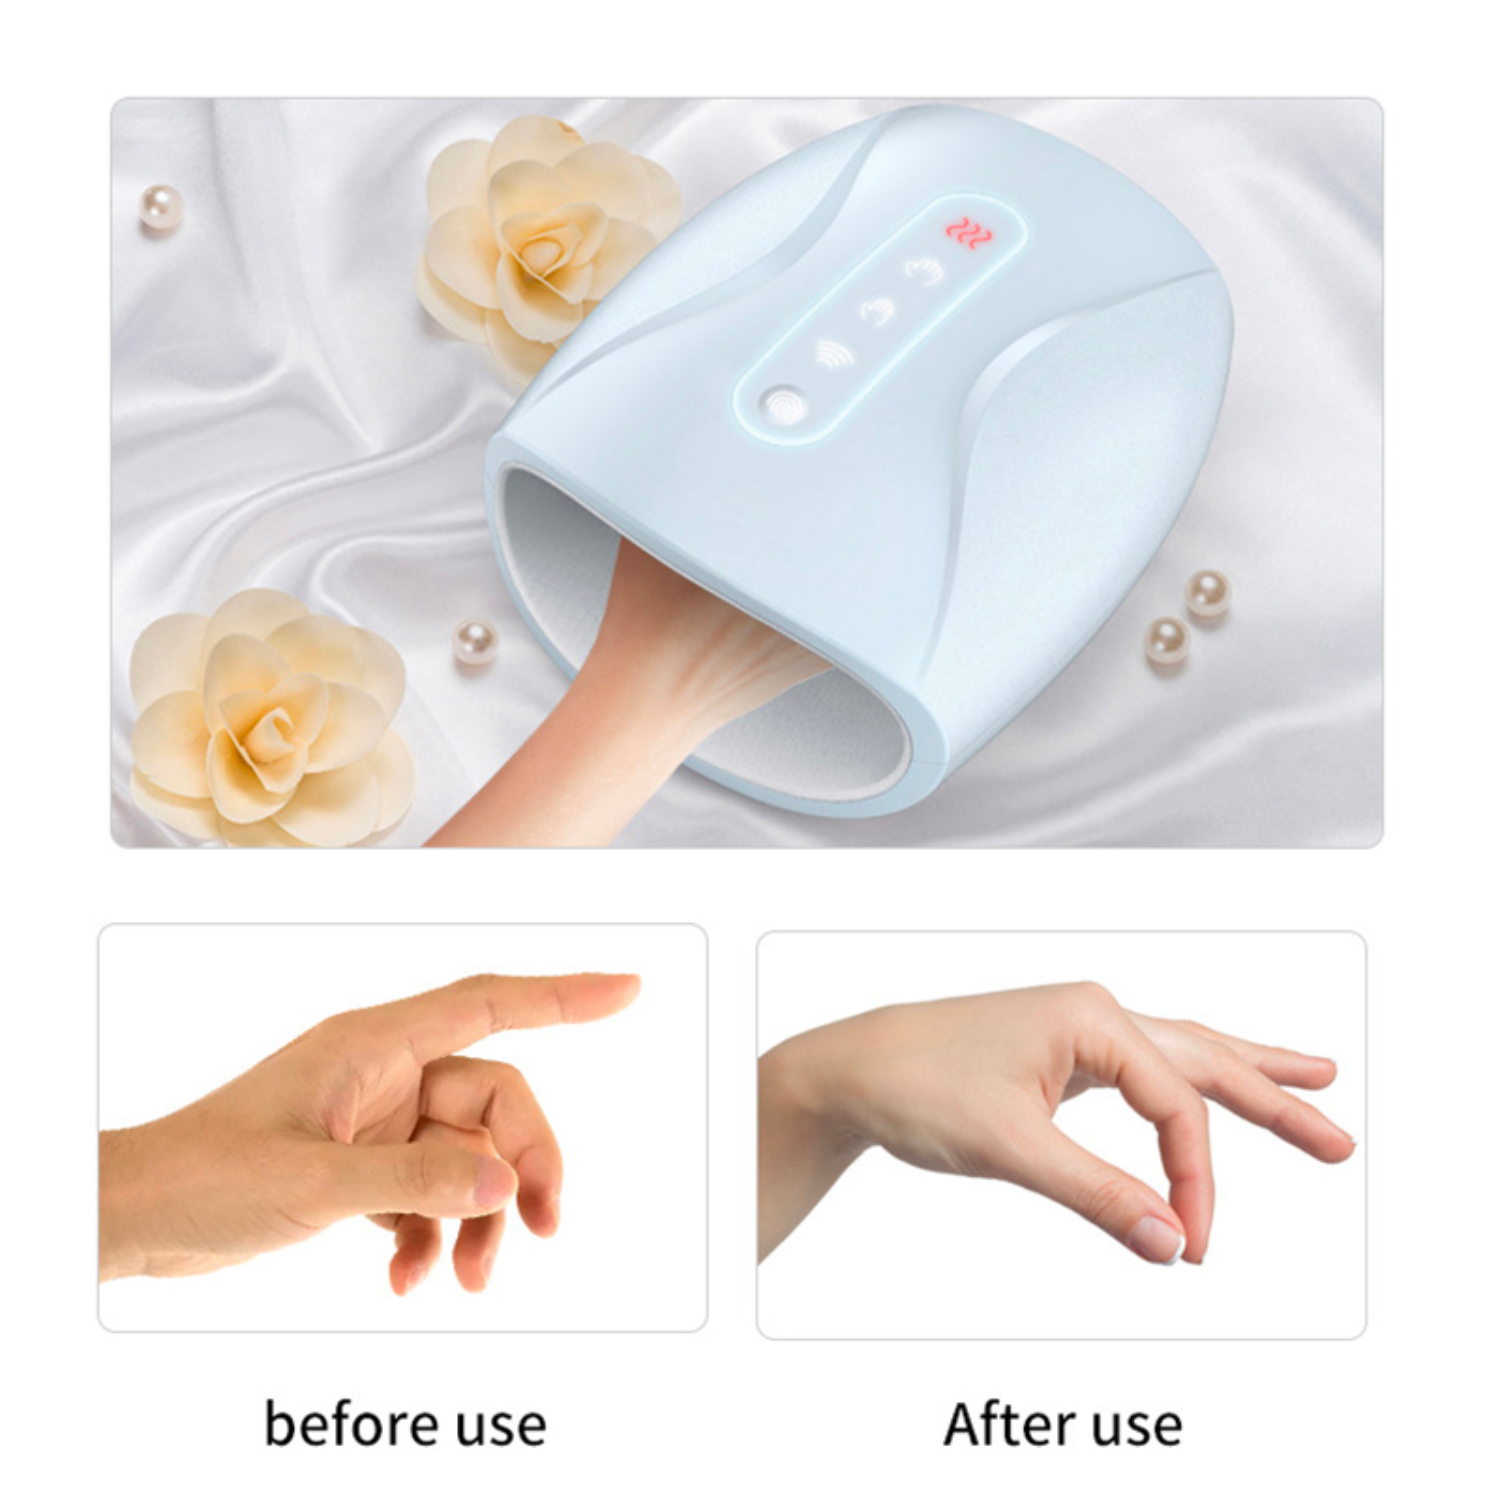 Smart Electric Hand Massage Device Air Compression Relaxation Relief Heated Palm Pain Relax Palm Finger Acupoint Spa Massager